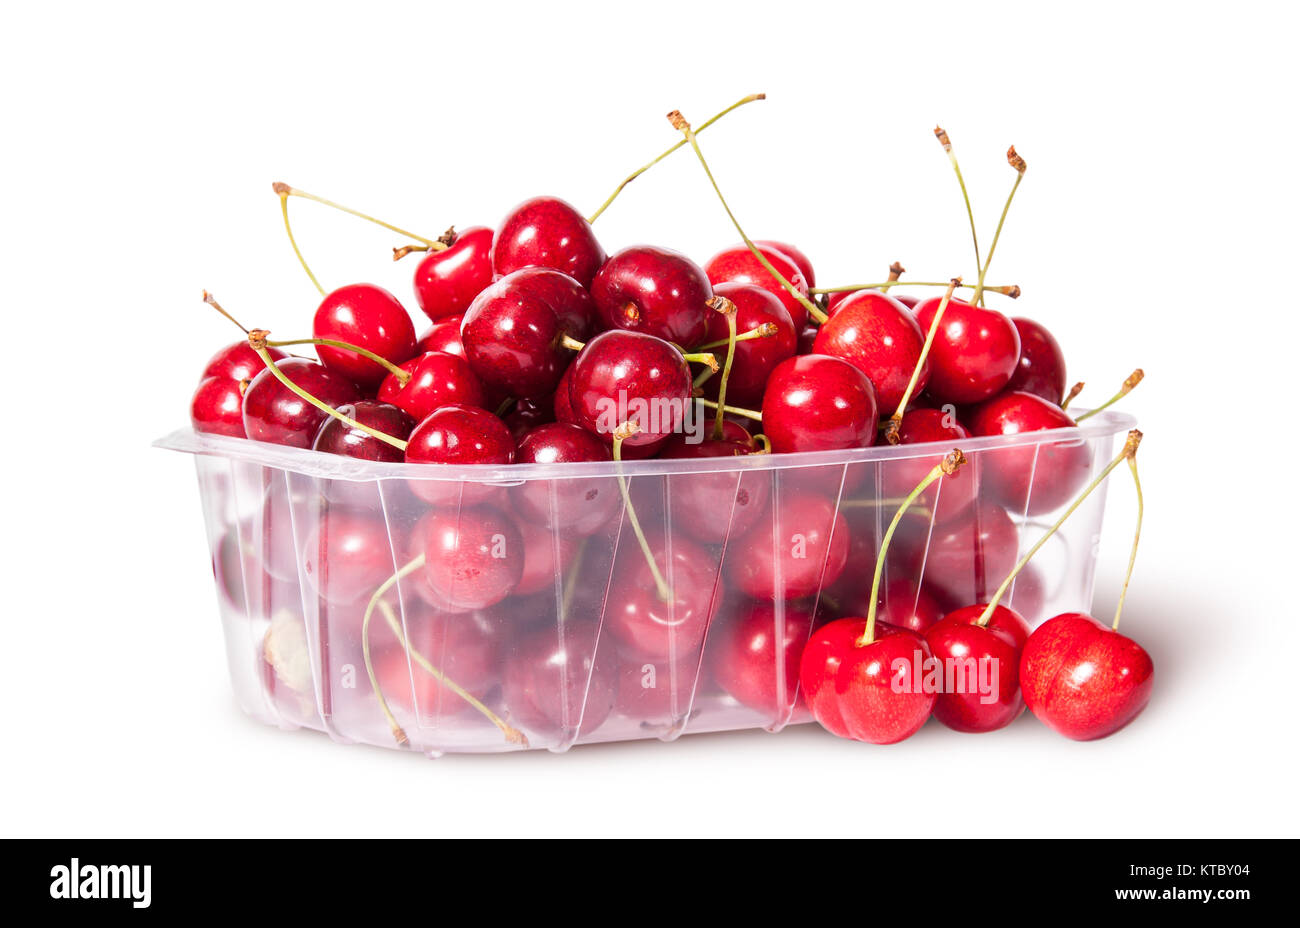 Red sweet cherries in plastic tray rotated and three near Stock Photo